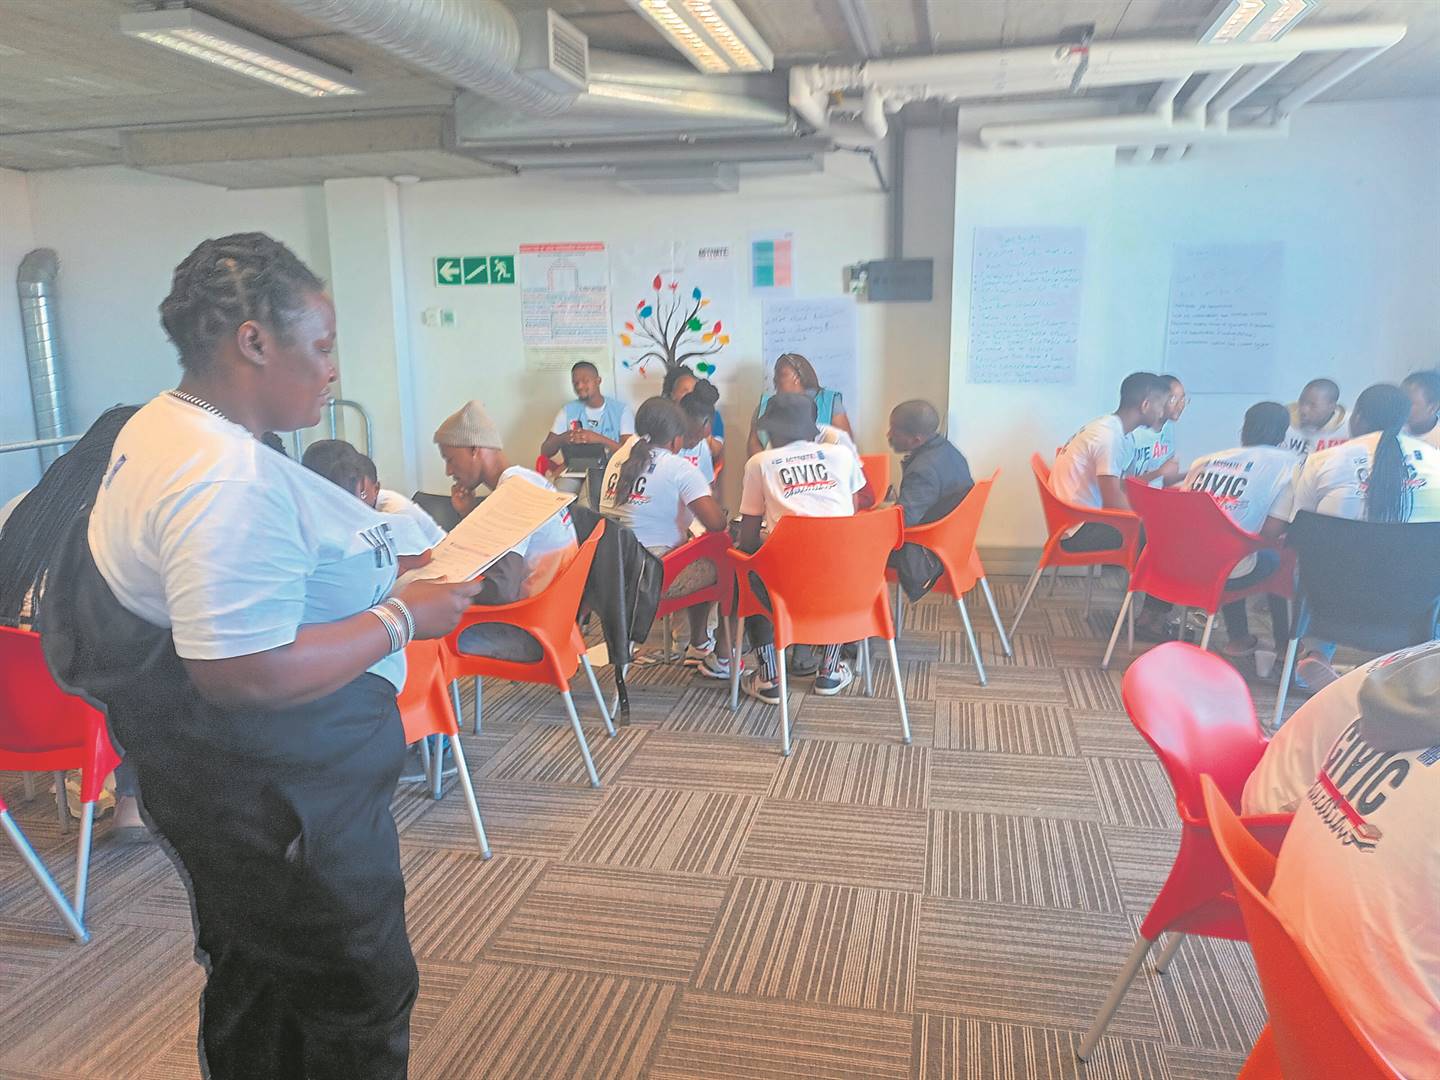 ACD empowers youth in Philippi, Cape Town | News24